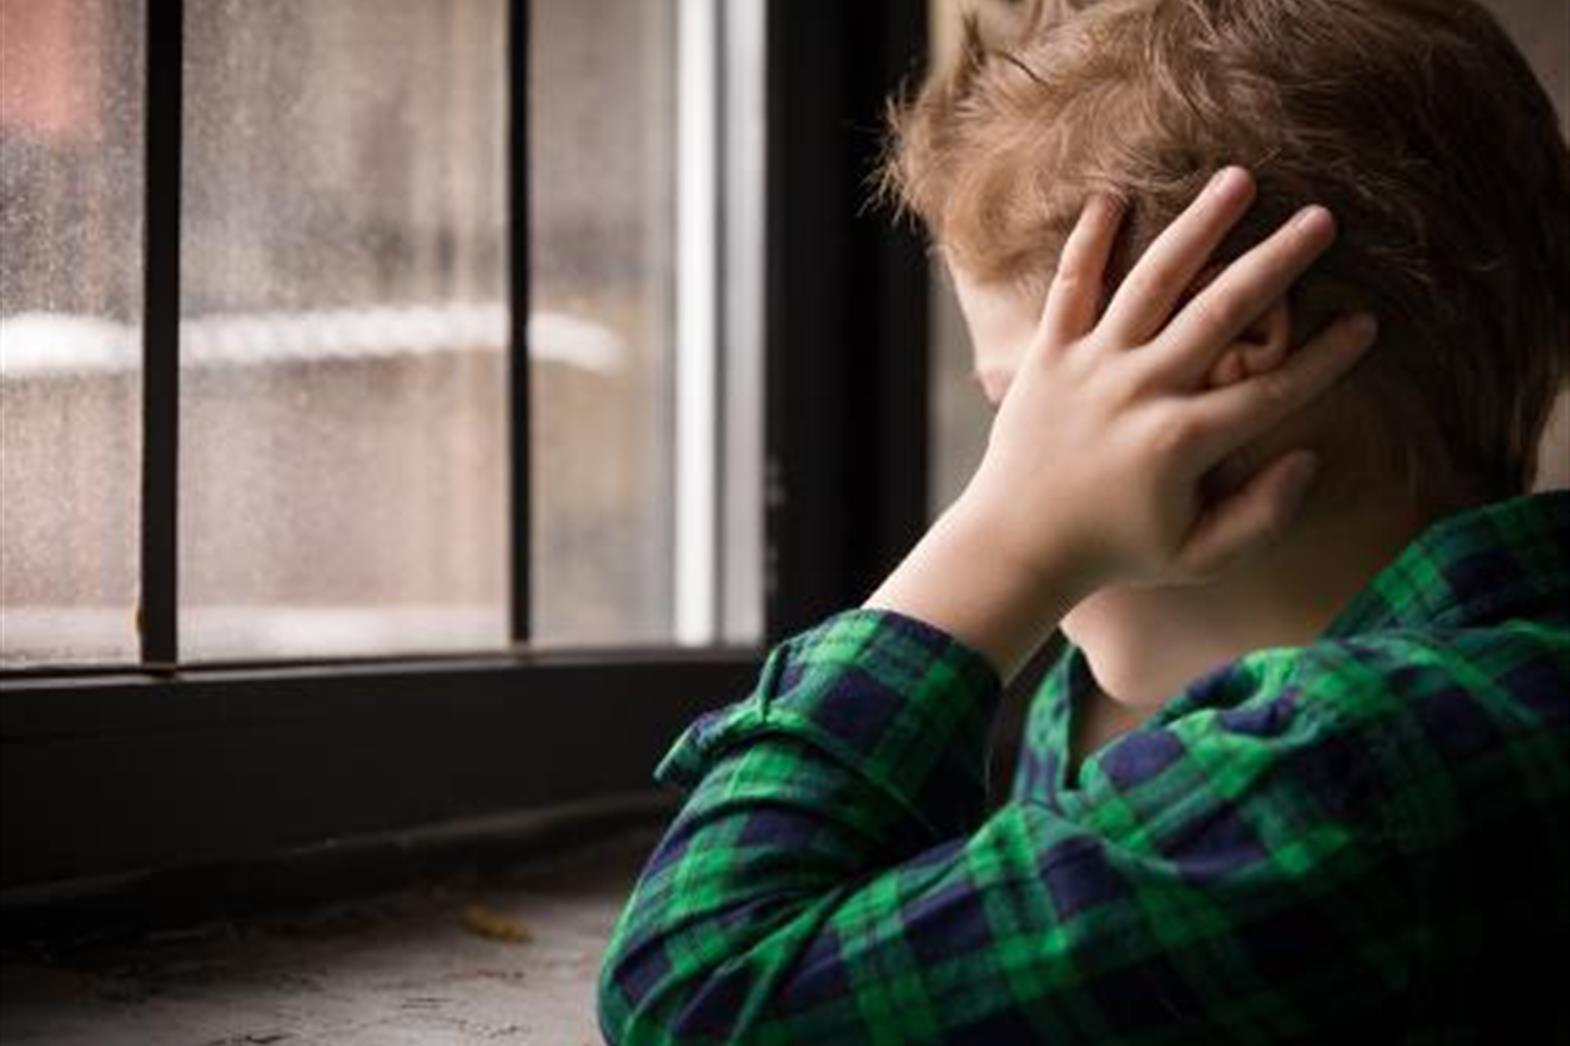 A boy looking out a window and covering his ears with his hands